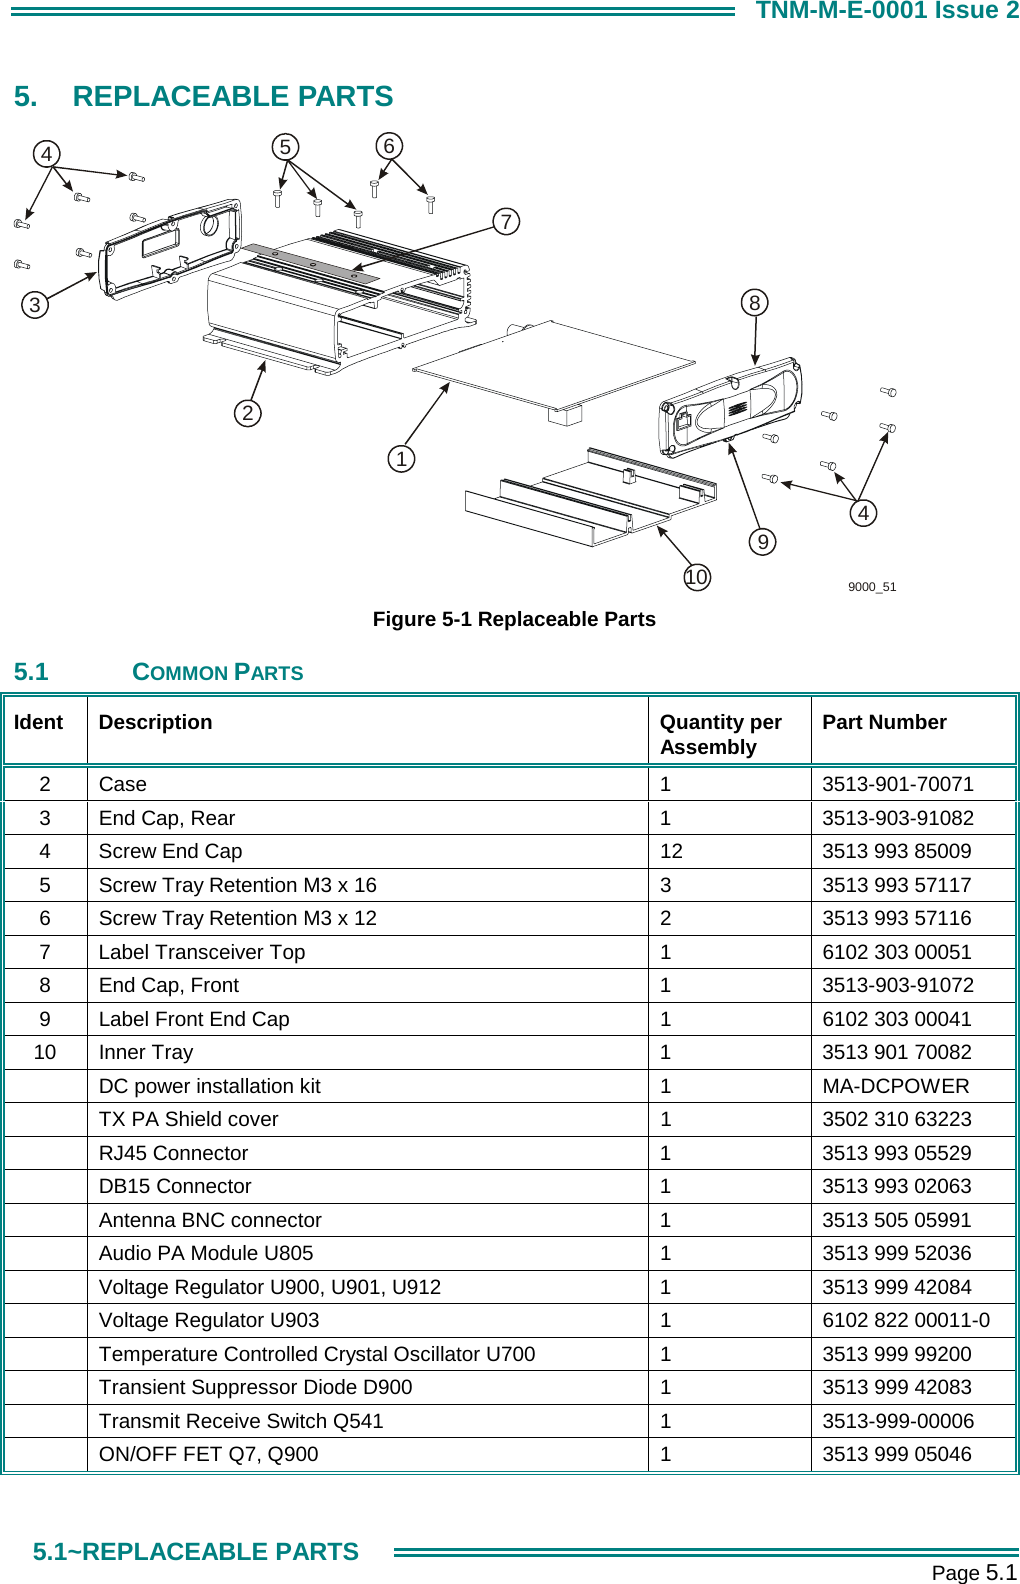       Page 5.1  5.1~REPLACEABLE PARTS TNM-M-E-0001 Issue 2 5. REPLACEABLE PARTS 1294734568109000_51 Figure 5-1 Replaceable Parts 5.1 COMMON PARTS Ident Description  Quantity per Assembly  Part Number 2 Case  1  3513-901-70071 3  End Cap, Rear  1  3513-903-91082 4  Screw End Cap  12  3513 993 85009 5  Screw Tray Retention M3 x 16  3  3513 993 57117 6  Screw Tray Retention M3 x 12  2  3513 993 57116 7  Label Transceiver Top  1  6102 303 00051 8  End Cap, Front  1  3513-903-91072 9  Label Front End Cap  1  6102 303 00041 10  Inner Tray  1  3513 901 70082   DC power installation kit  1  MA-DCPOWER   TX PA Shield cover  1  3502 310 63223   RJ45 Connector  1  3513 993 05529   DB15 Connector  1  3513 993 02063   Antenna BNC connector  1  3513 505 05991   Audio PA Module U805  1  3513 999 52036   Voltage Regulator U900, U901, U912   1  3513 999 42084   Voltage Regulator U903  1  6102 822 00011-0   Temperature Controlled Crystal Oscillator U700  1  3513 999 99200   Transient Suppressor Diode D900  1  3513 999 42083   Transmit Receive Switch Q541  1  3513-999-00006   ON/OFF FET Q7, Q900  1  3513 999 05046  